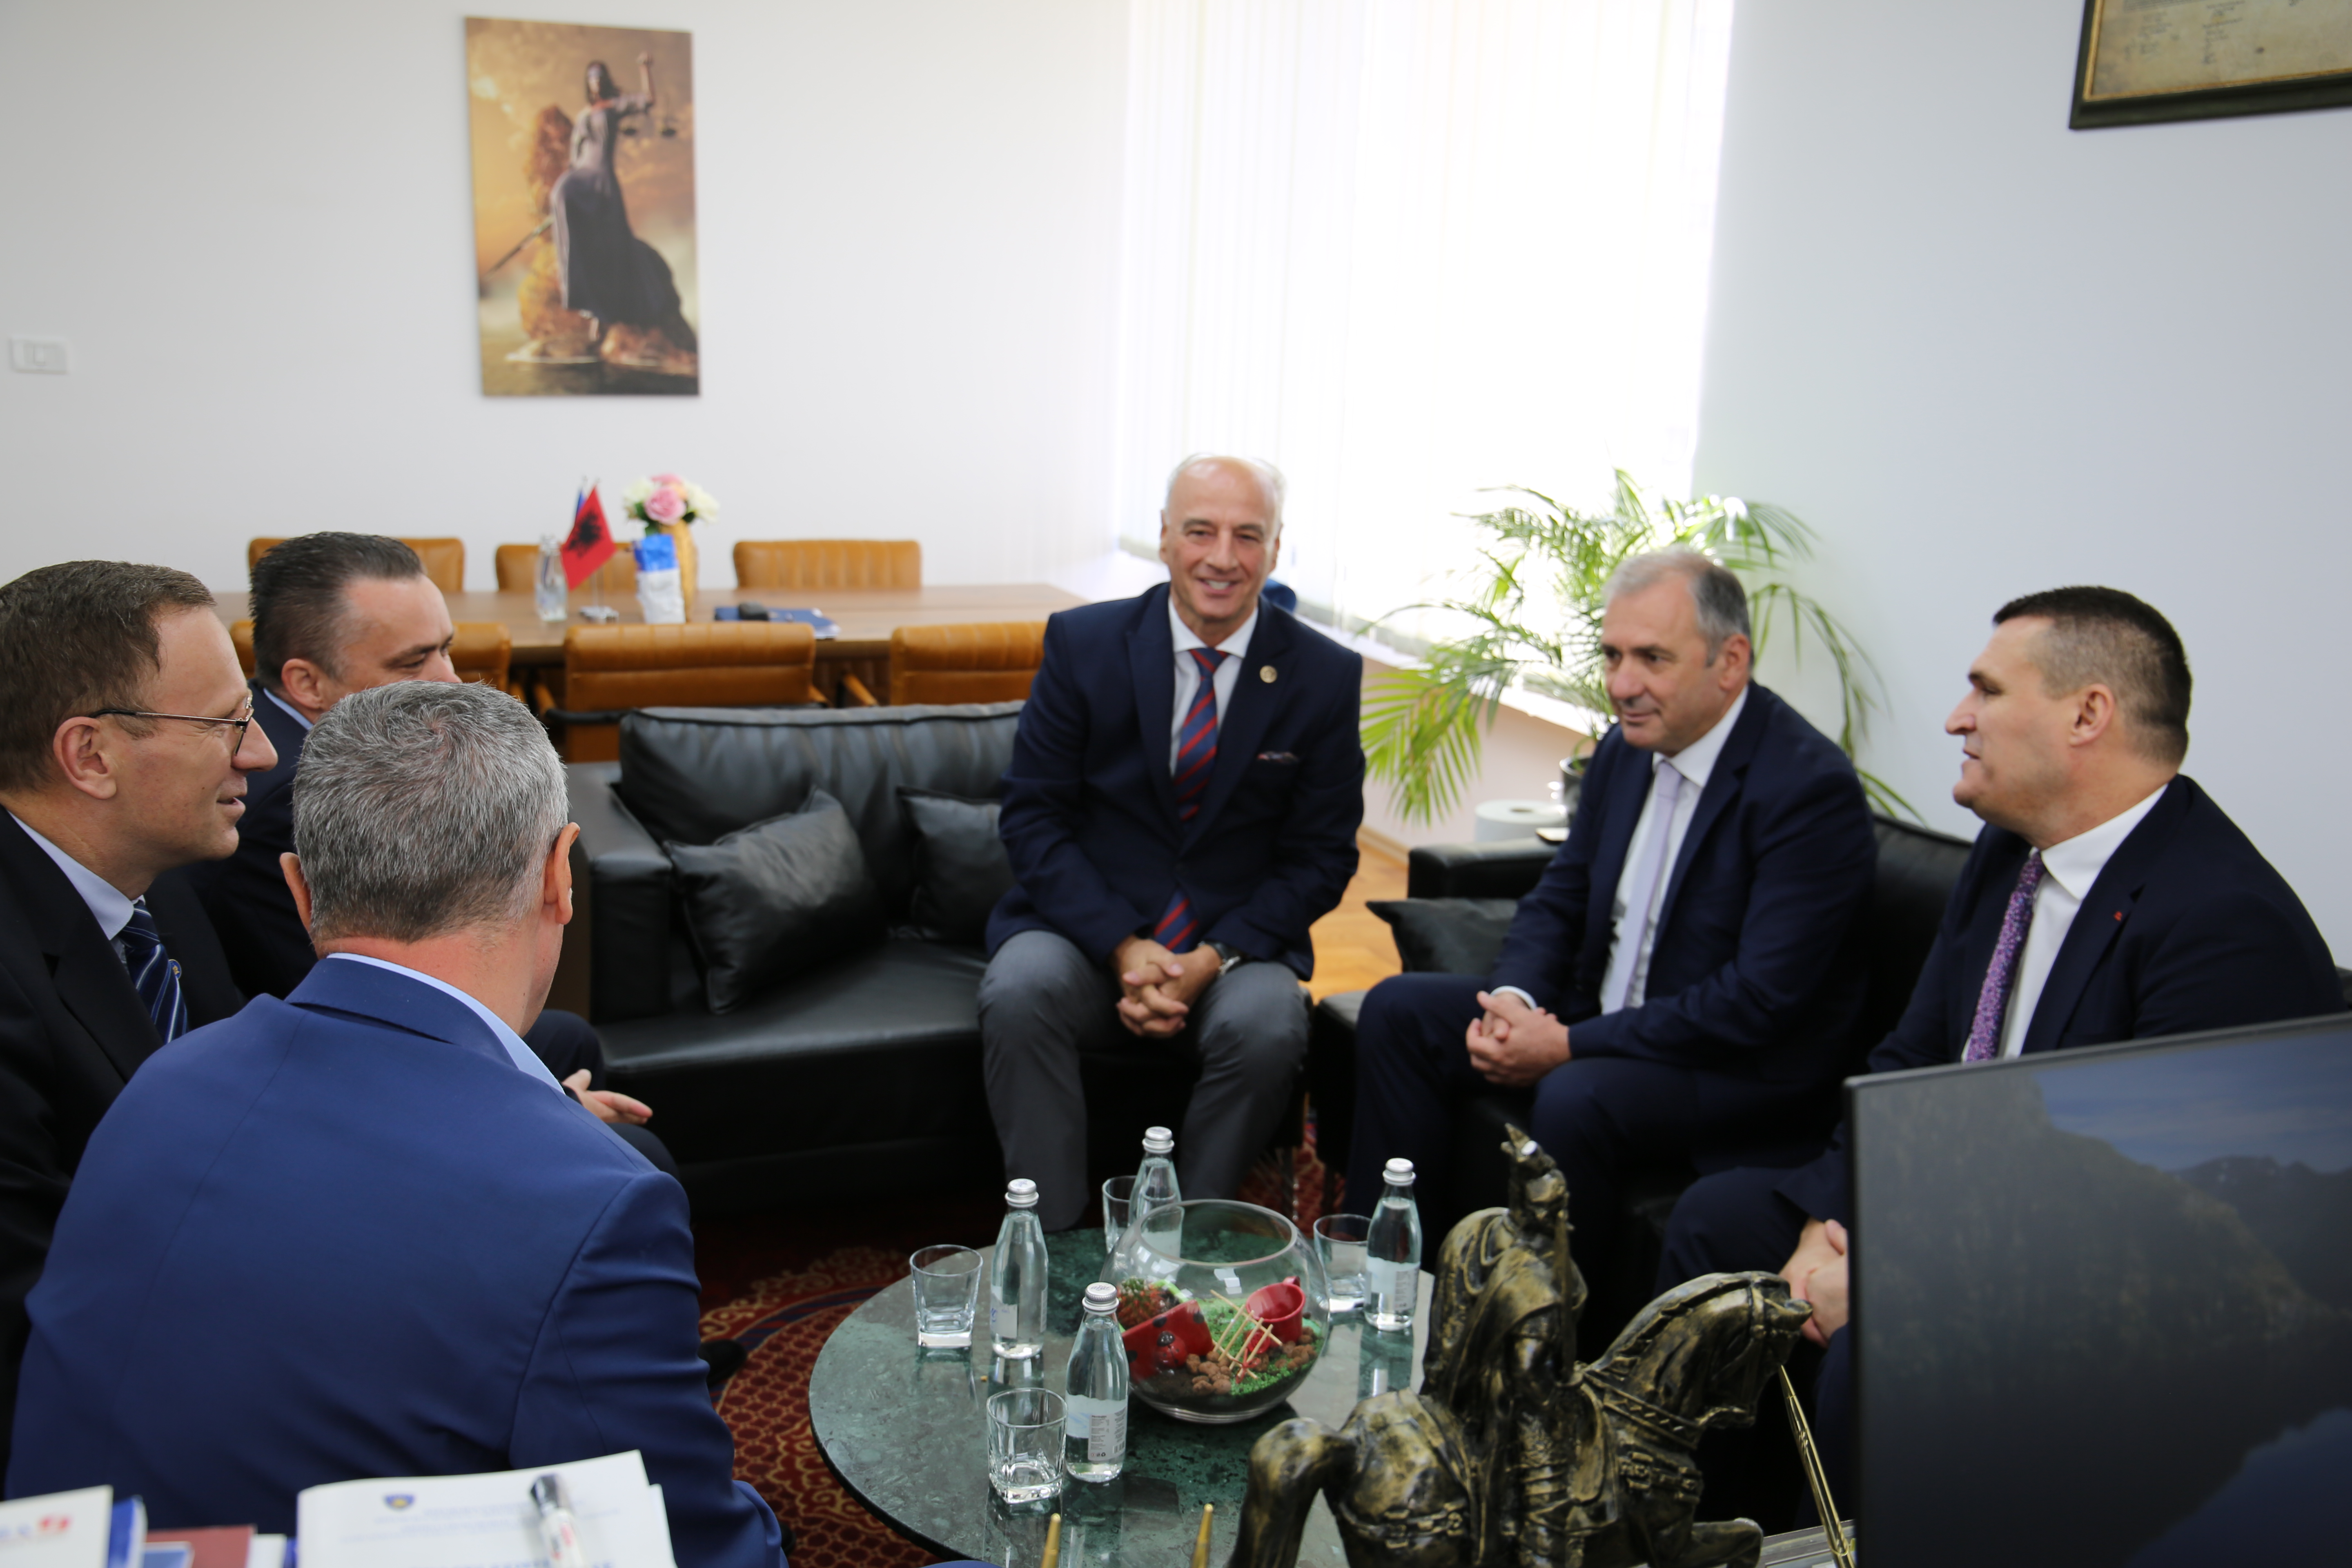 The Chairman of the Kosovo Prosecutorial Council hosted the representatives of the Special Prosecution against Corruption and Organized Crime of the Republic of Albania